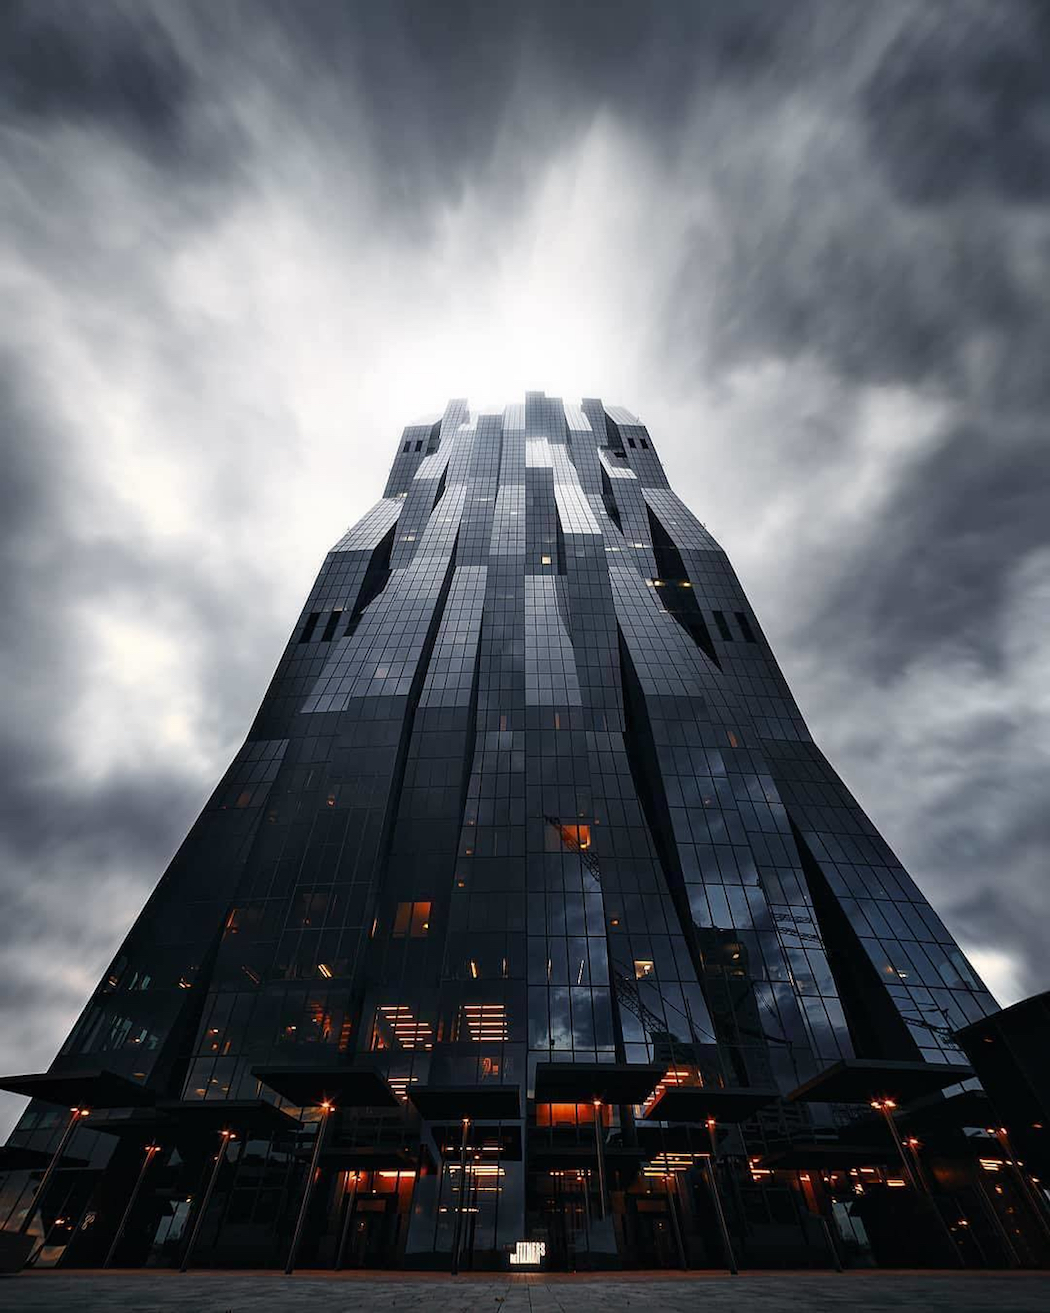 dc_tower_1_designed_by_dominique_perrault